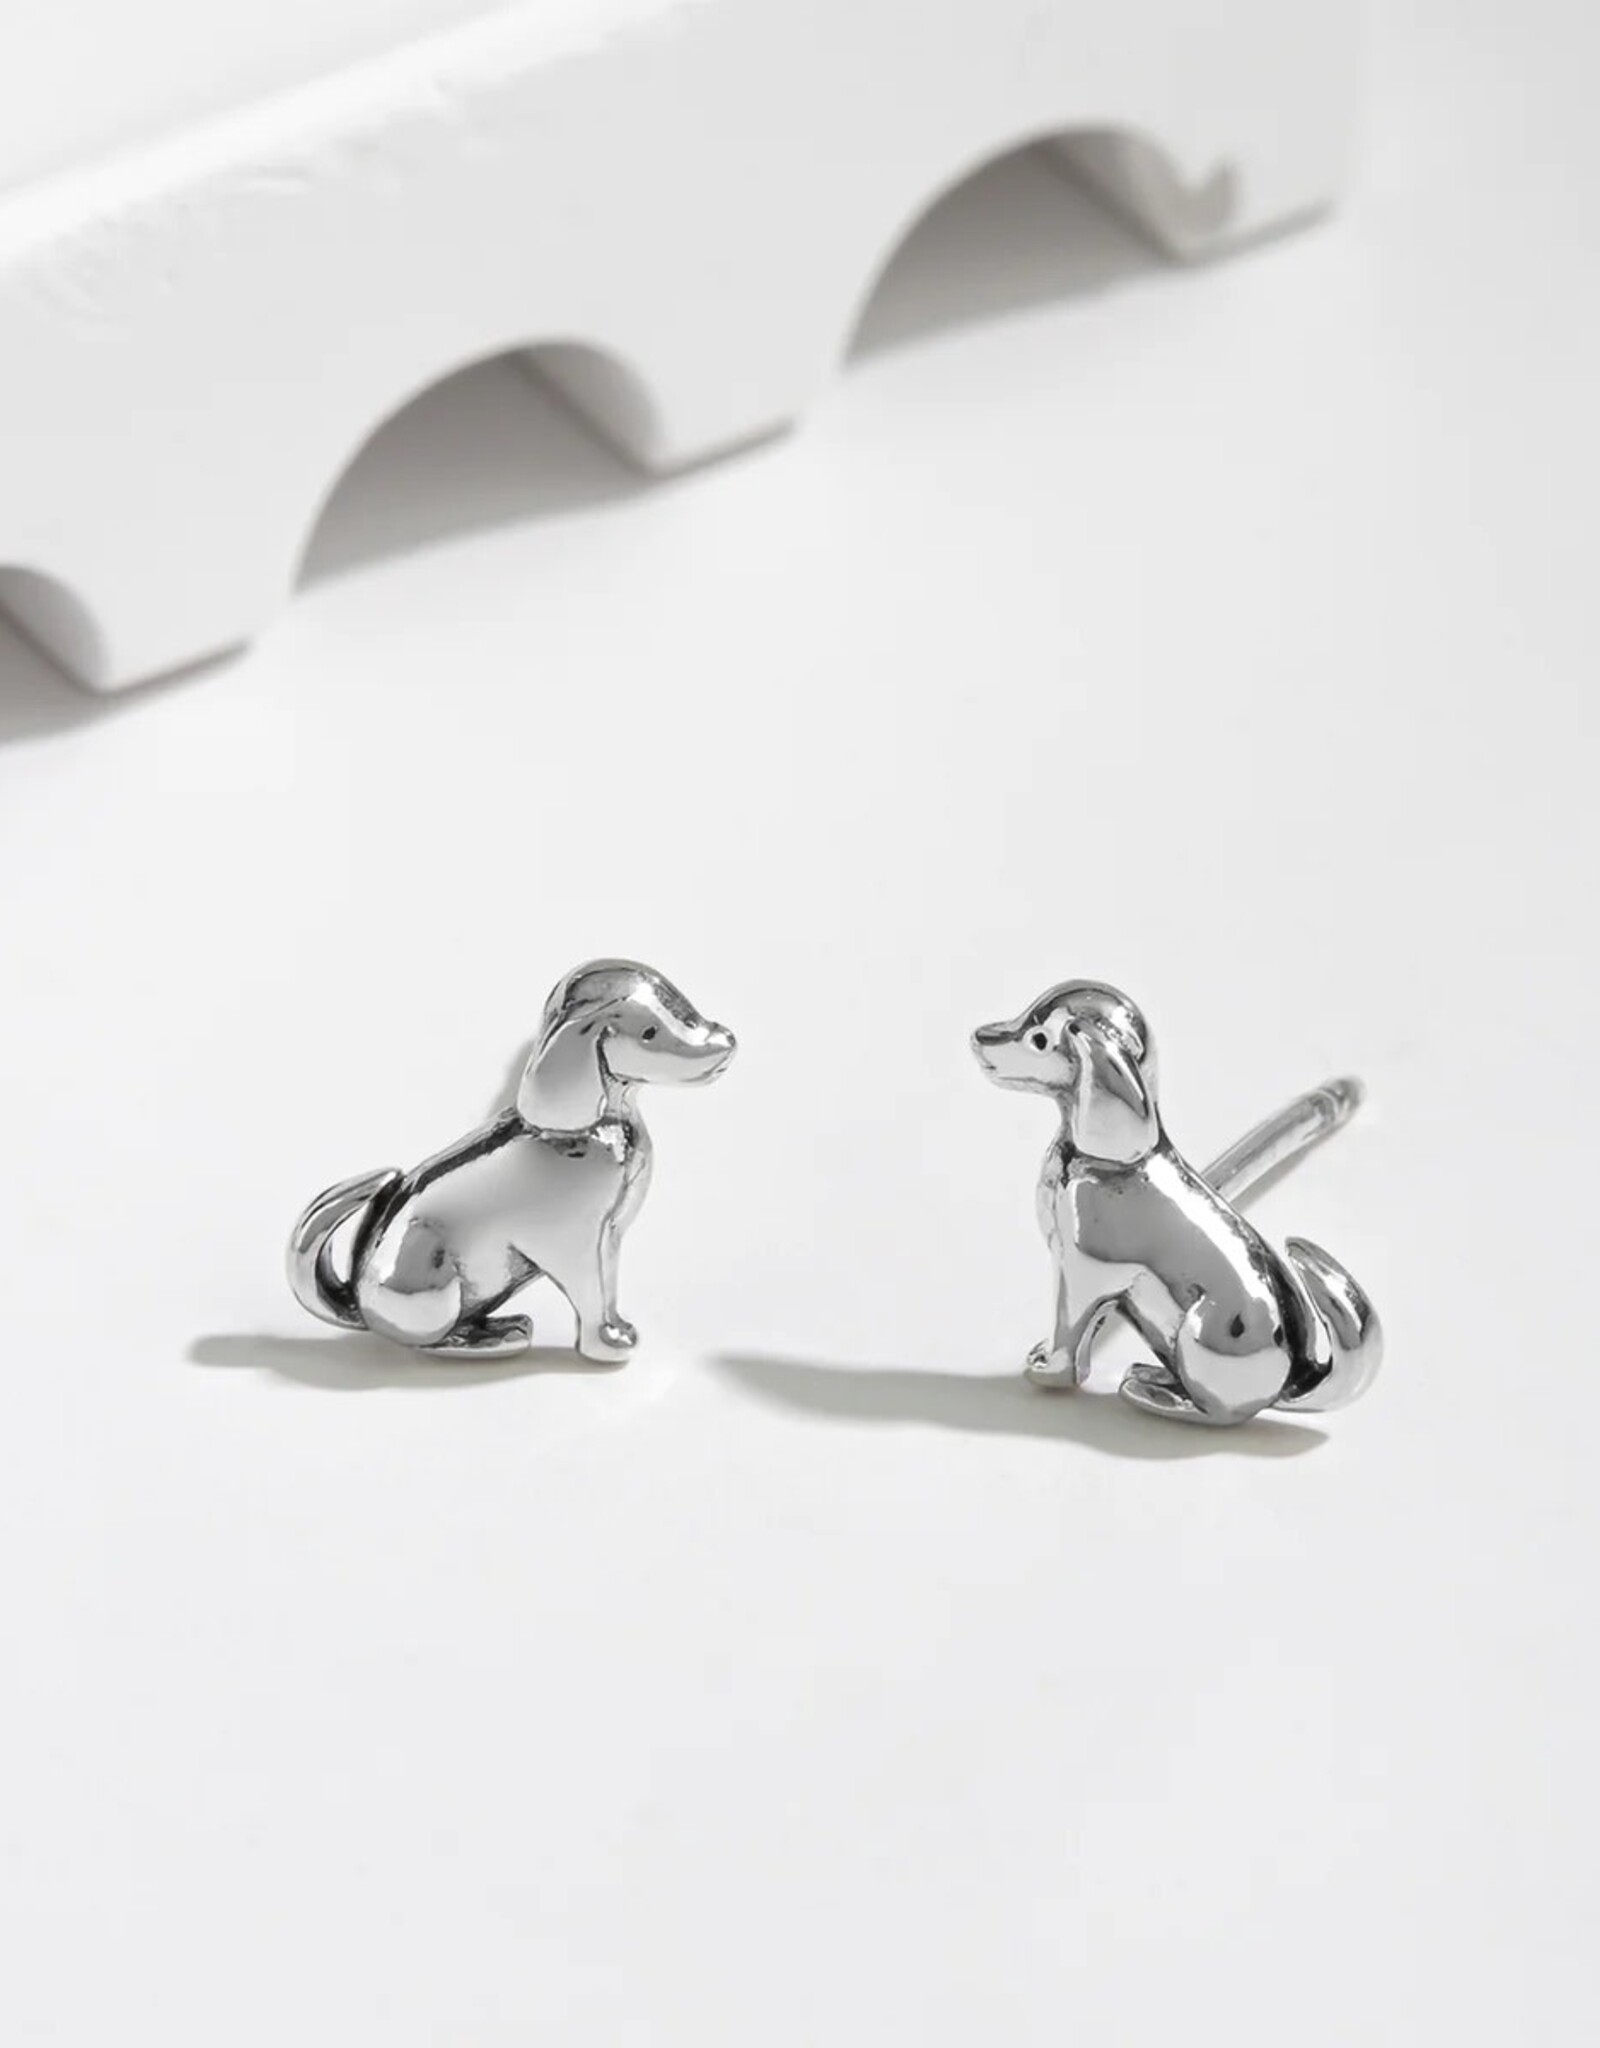 Boma PUPPY DOG STUD EARRING - sterling silver